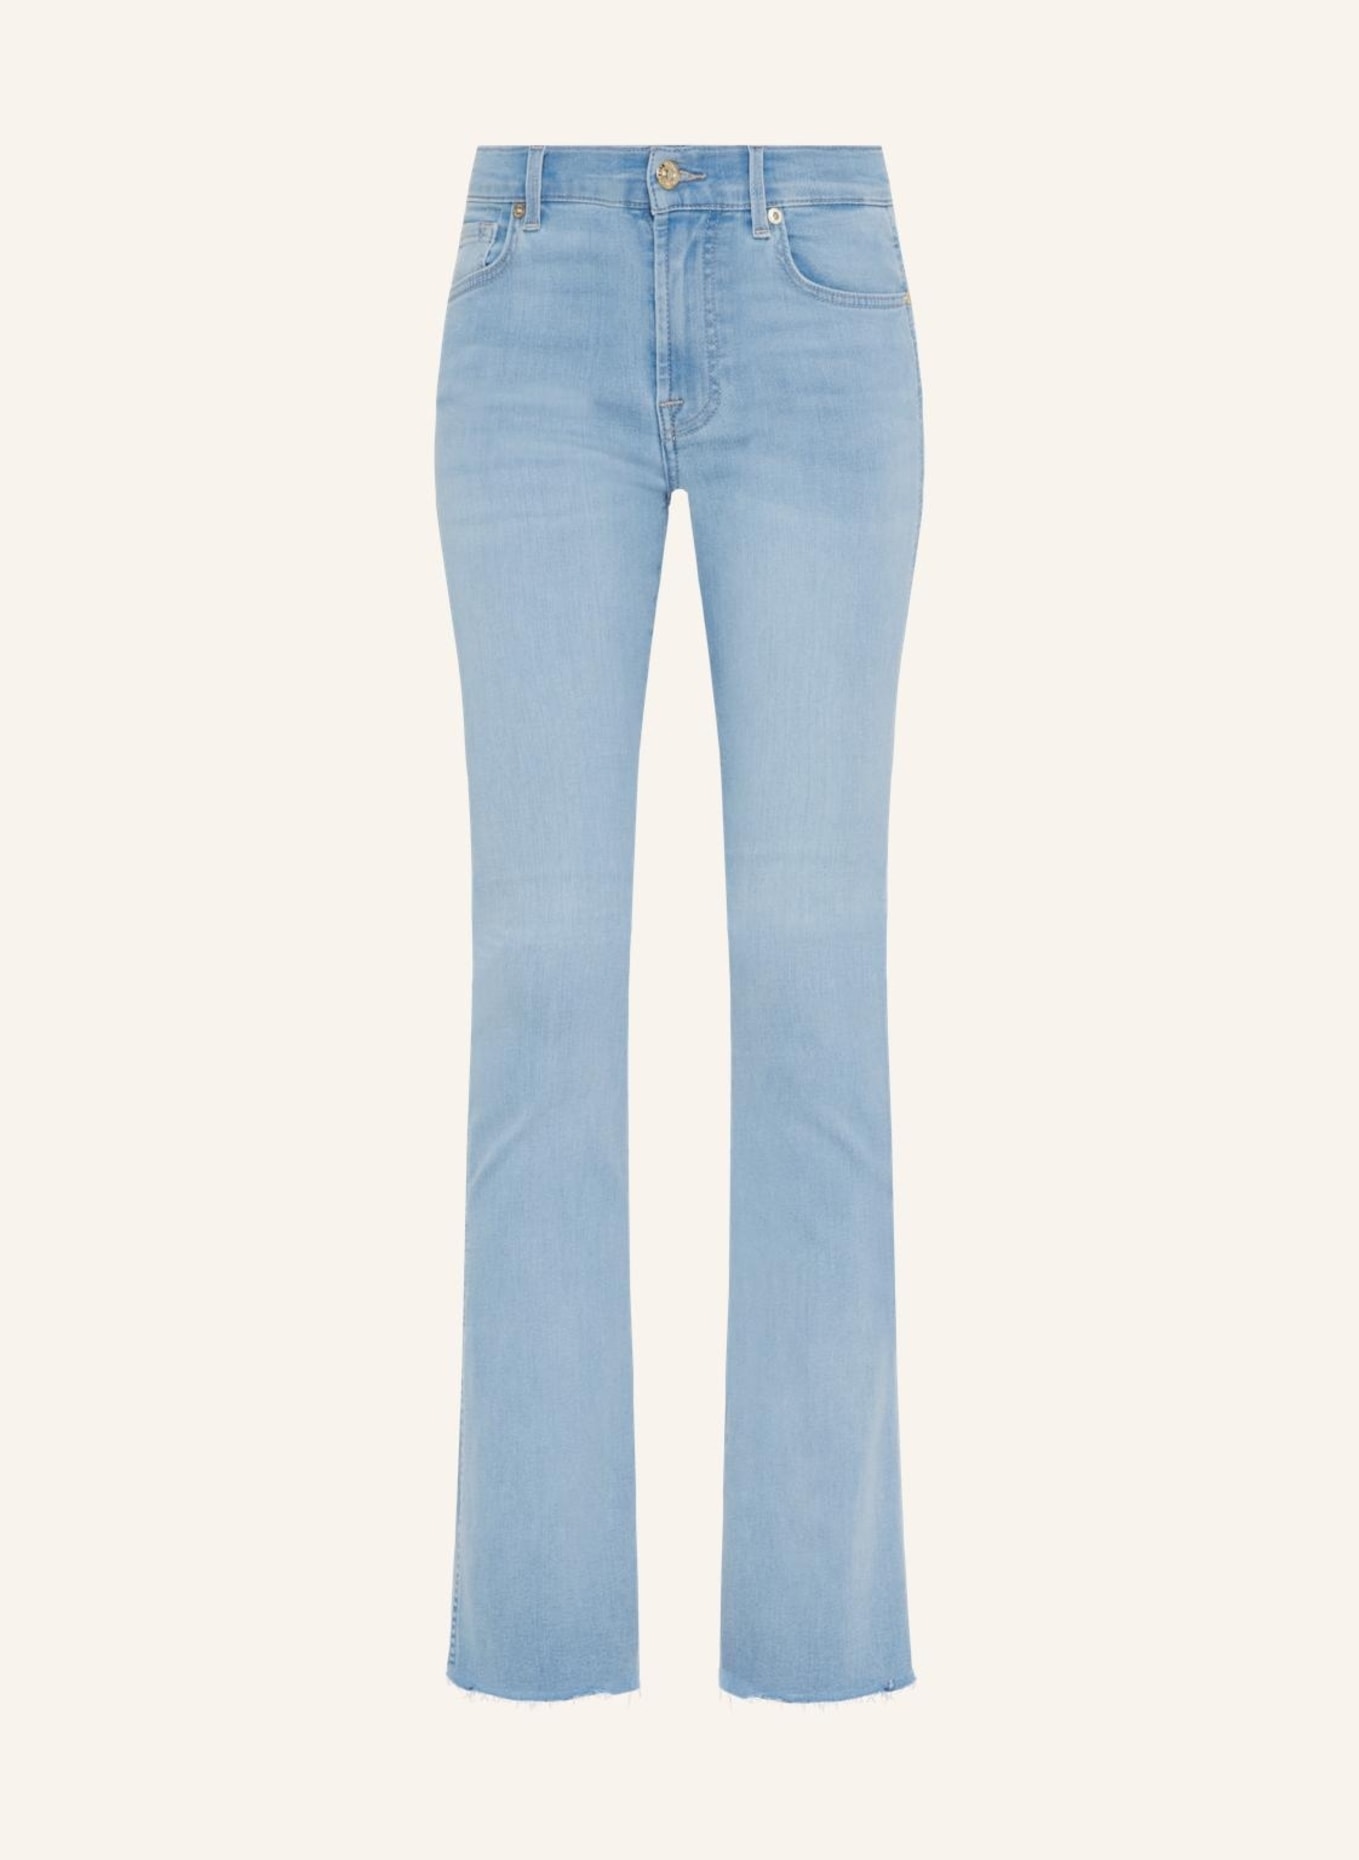 7 for all mankind Jeans BOOTCUT TAILORLESS Bootcut fit, Farbe: BLAU (Bild 1)